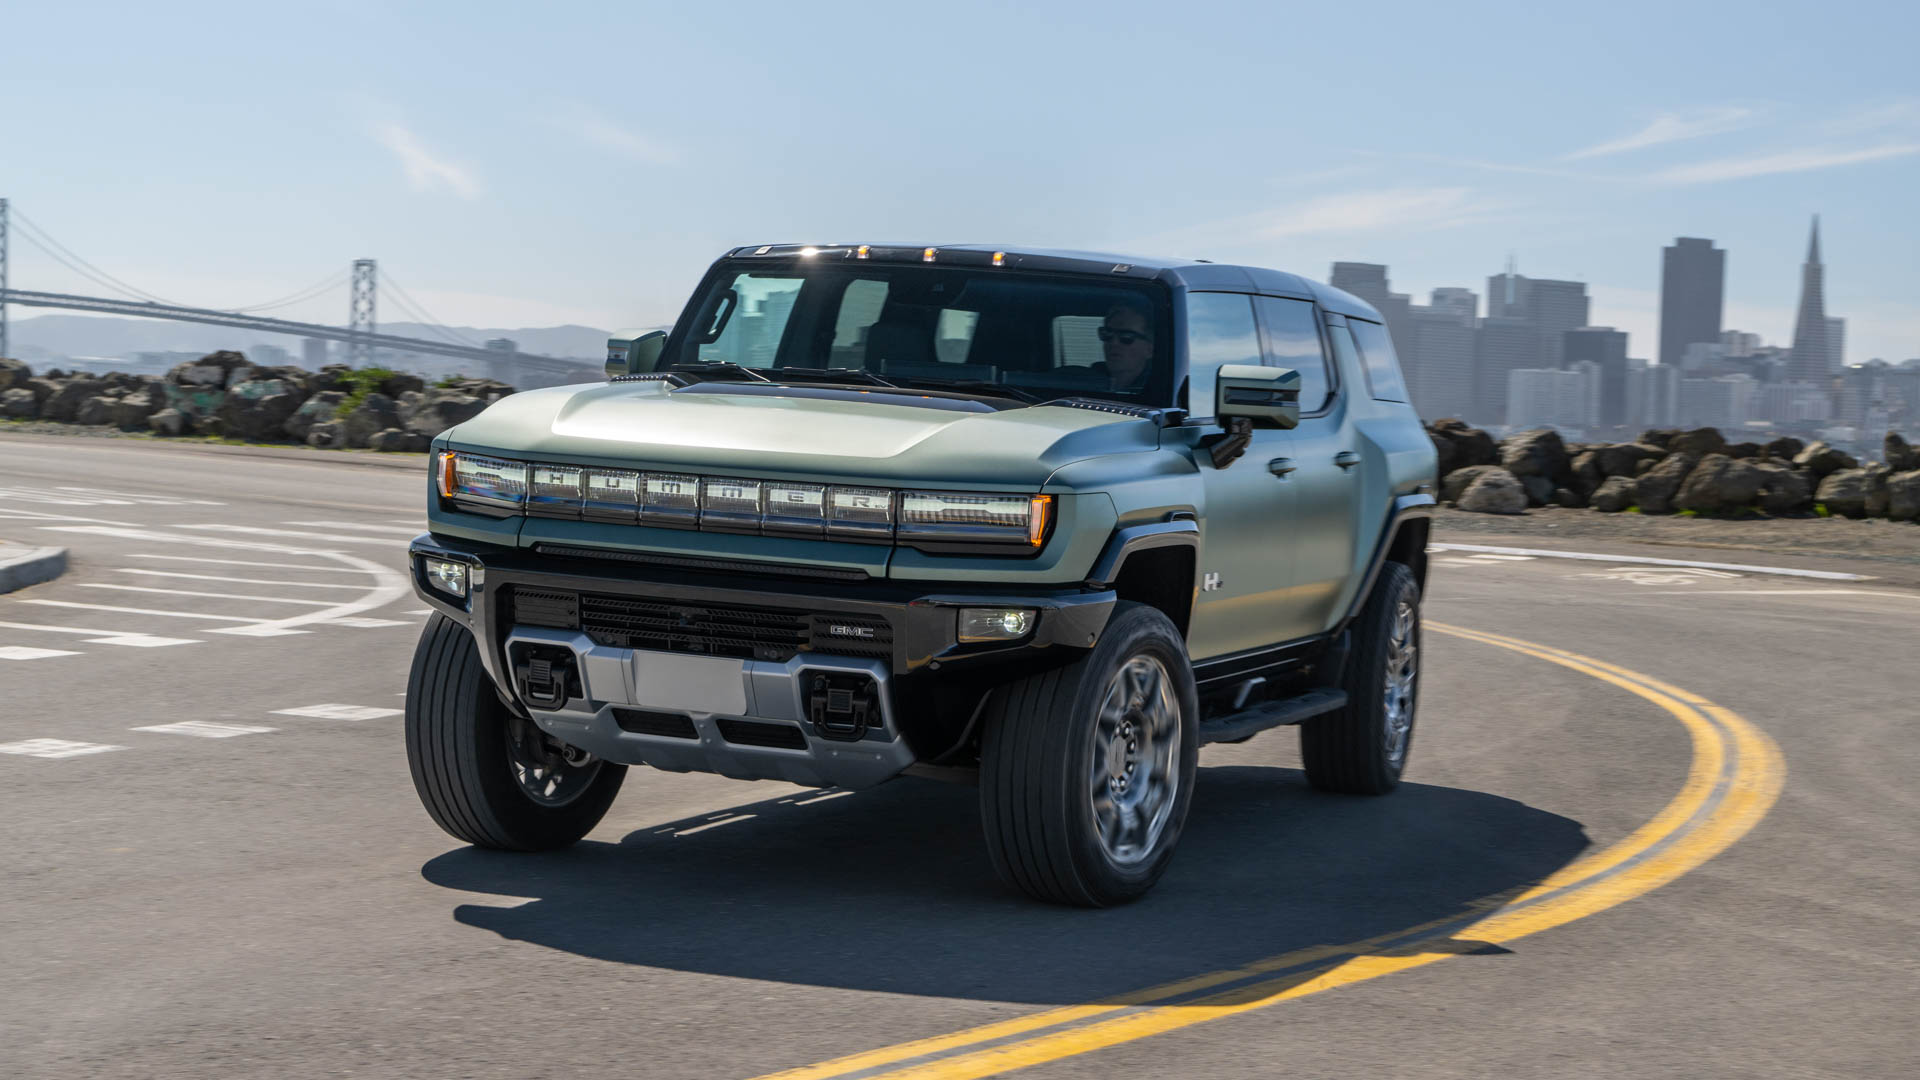 The GMC Hummer EV is So Inefficient It Makes Other Electric Trucks Look Thrifty